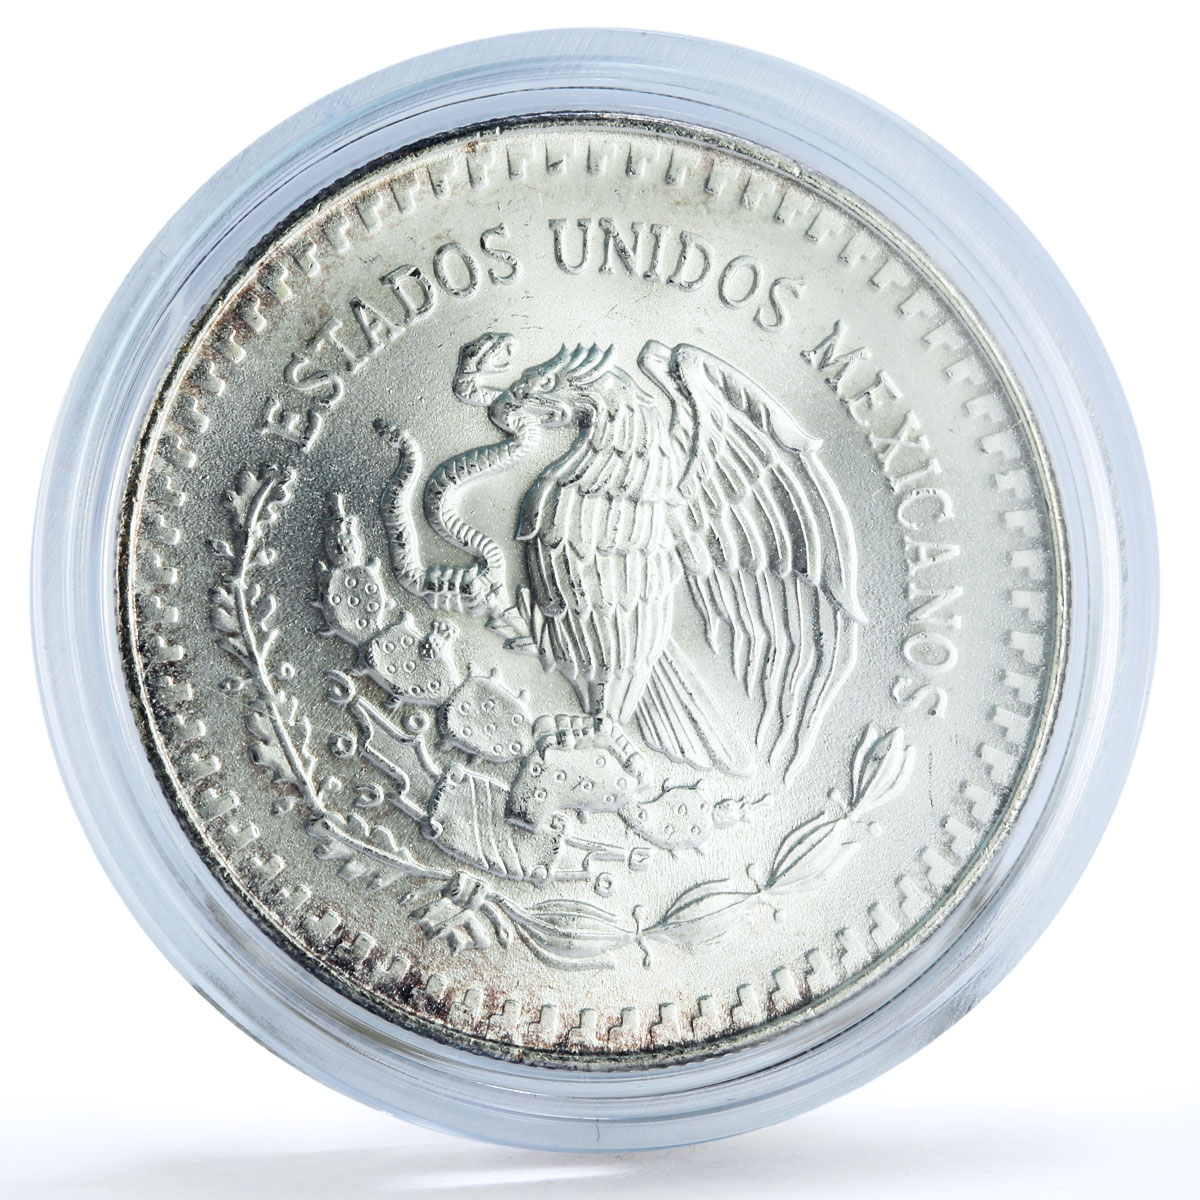 Mexico 1 onza Libertad Angel of Independence silver coin 1991